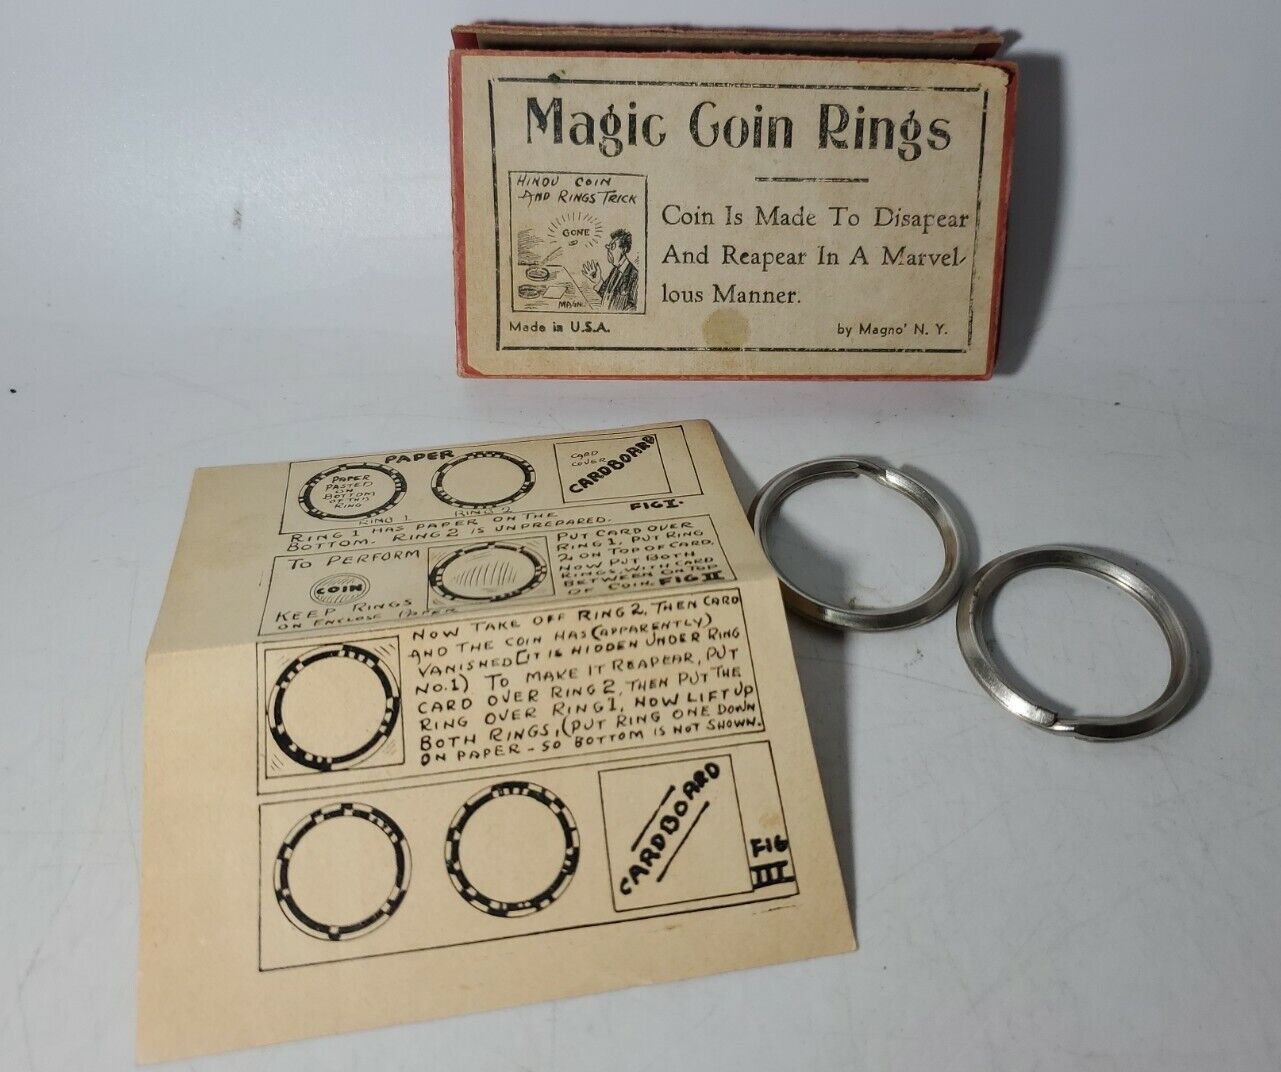 Vintage Magic Coin Rings Original Box and Paperwork Made in USA By Magno'N.Y.